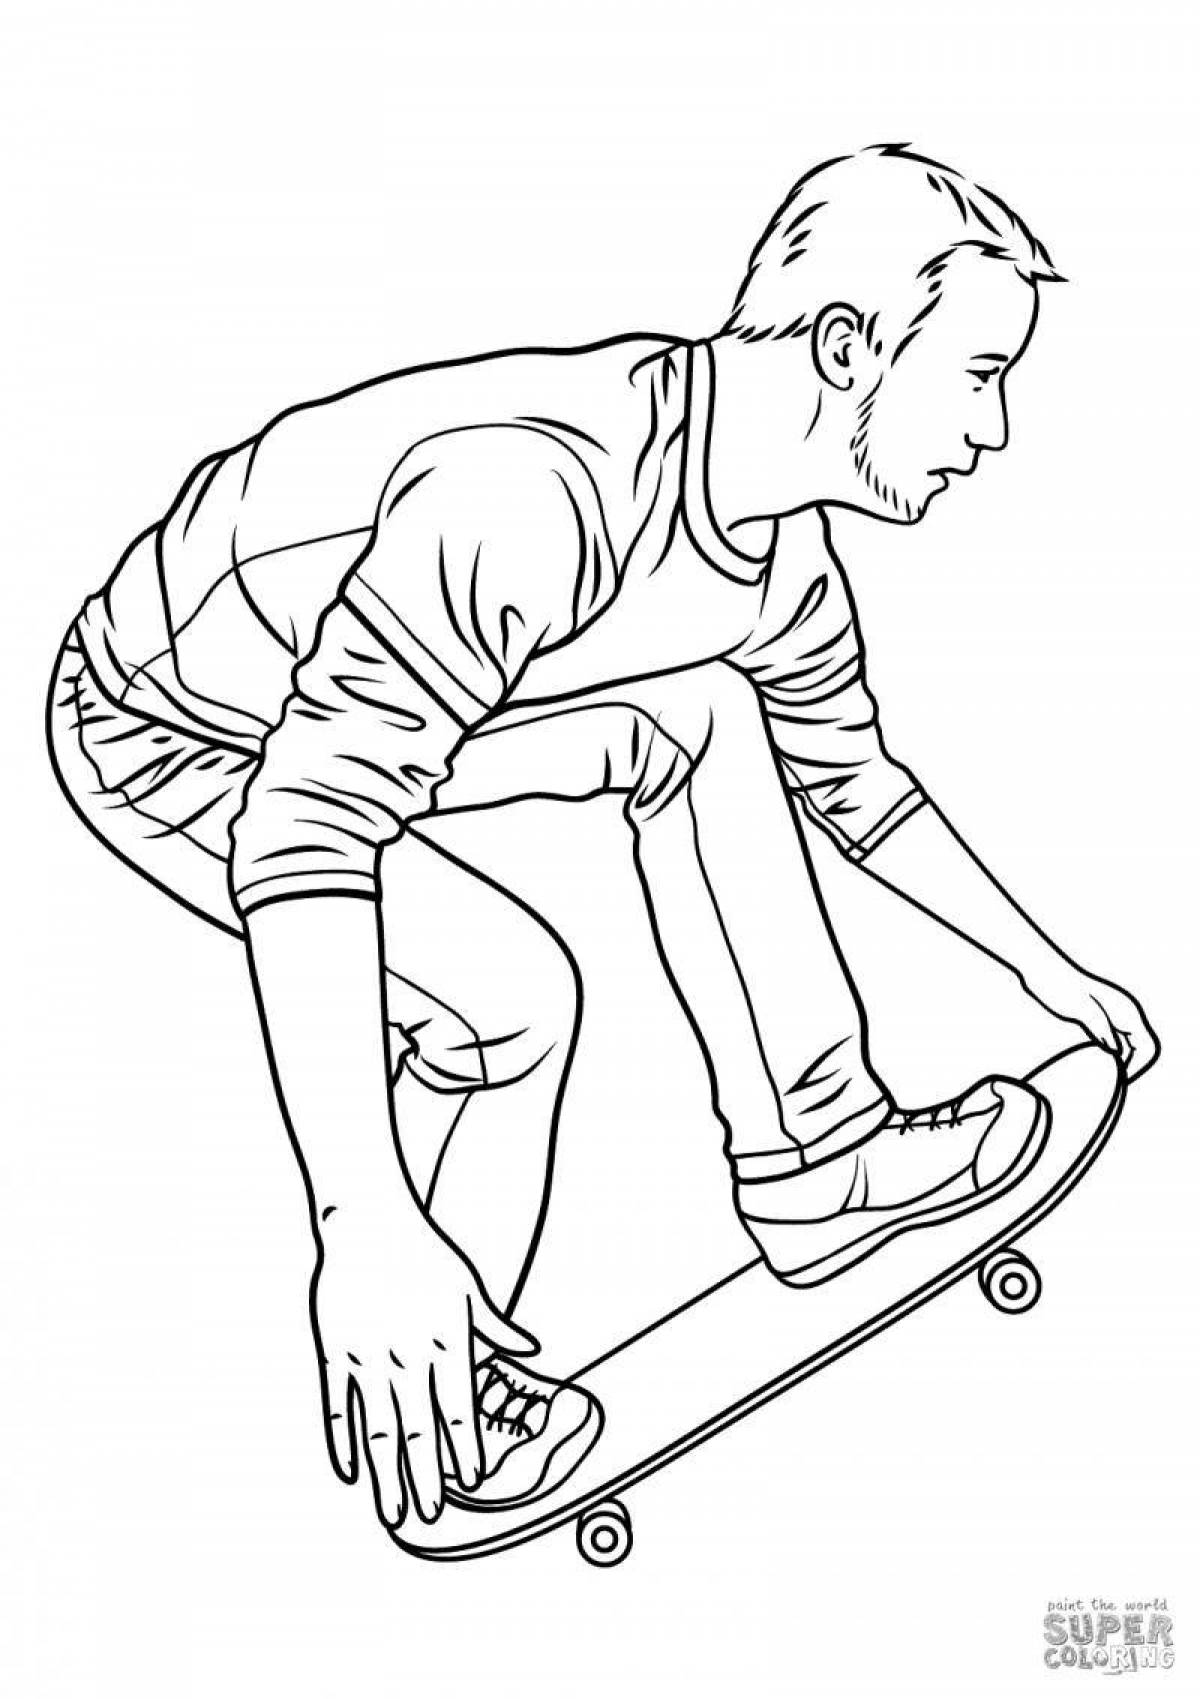 Artistic skateboarder coloring page